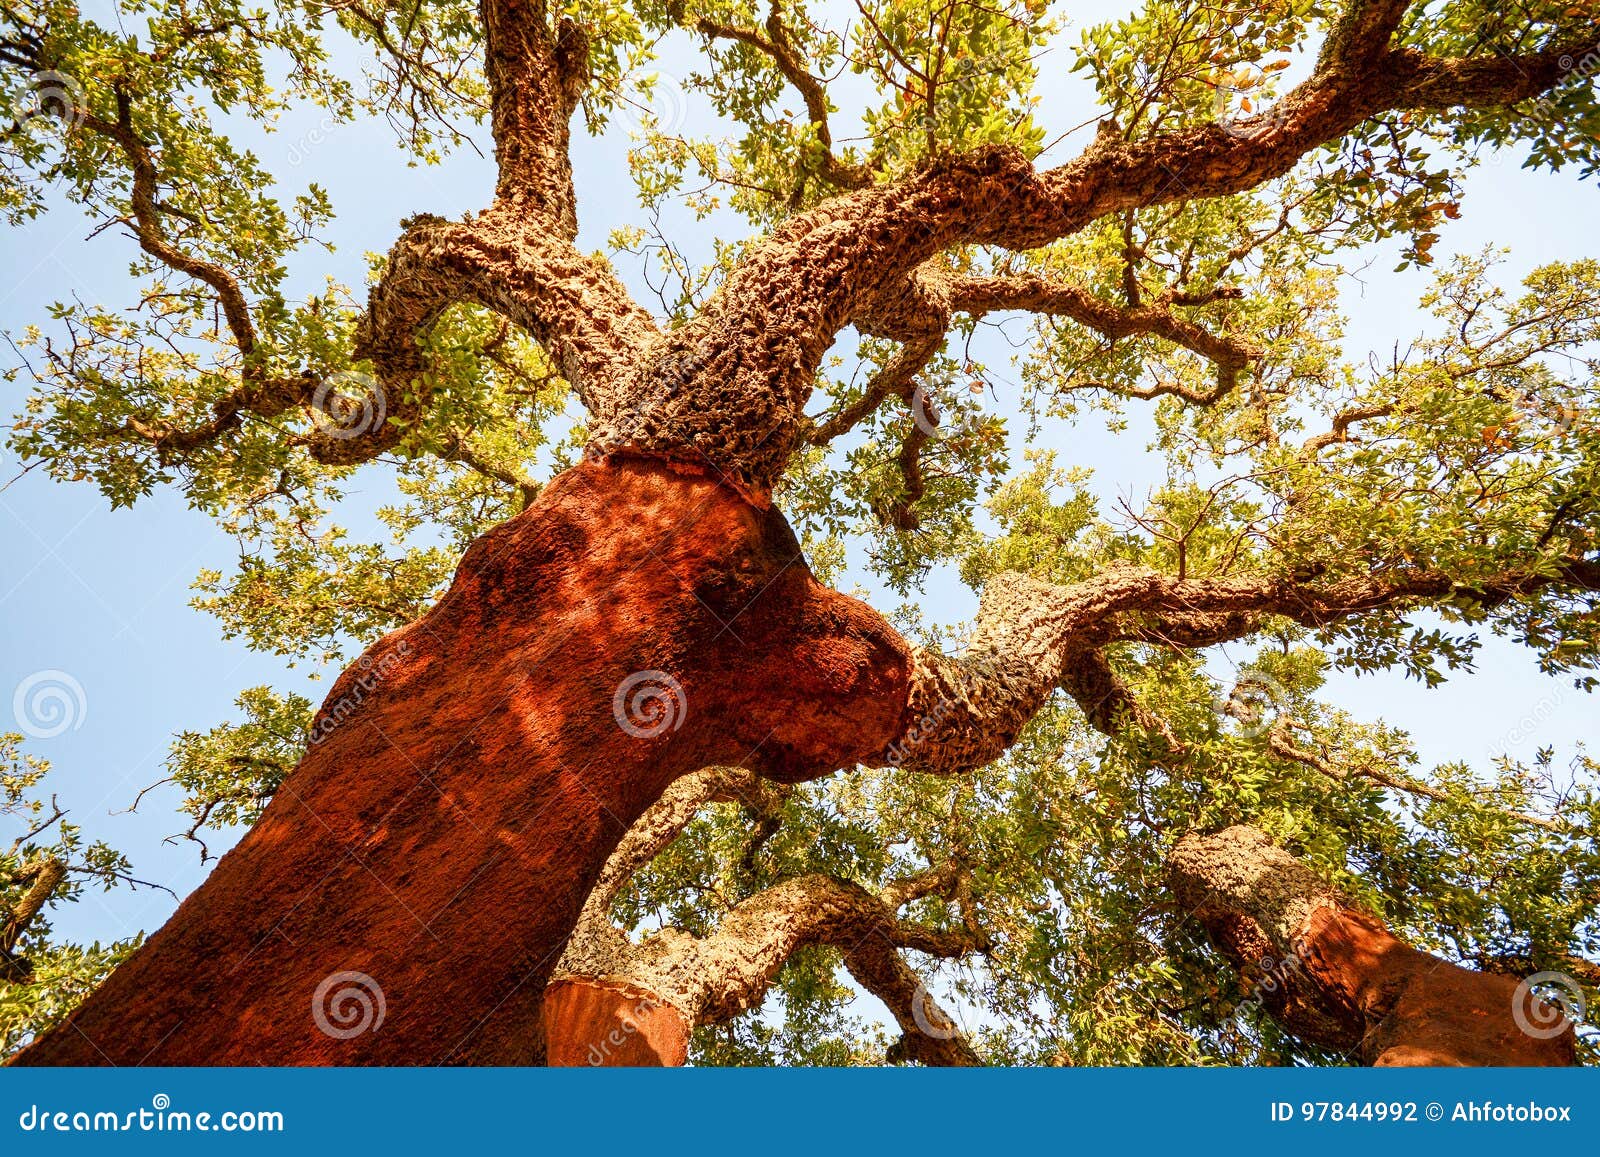 harvested trunk of an old cork oak tree quercus suber in evening sun, alentejo portugal